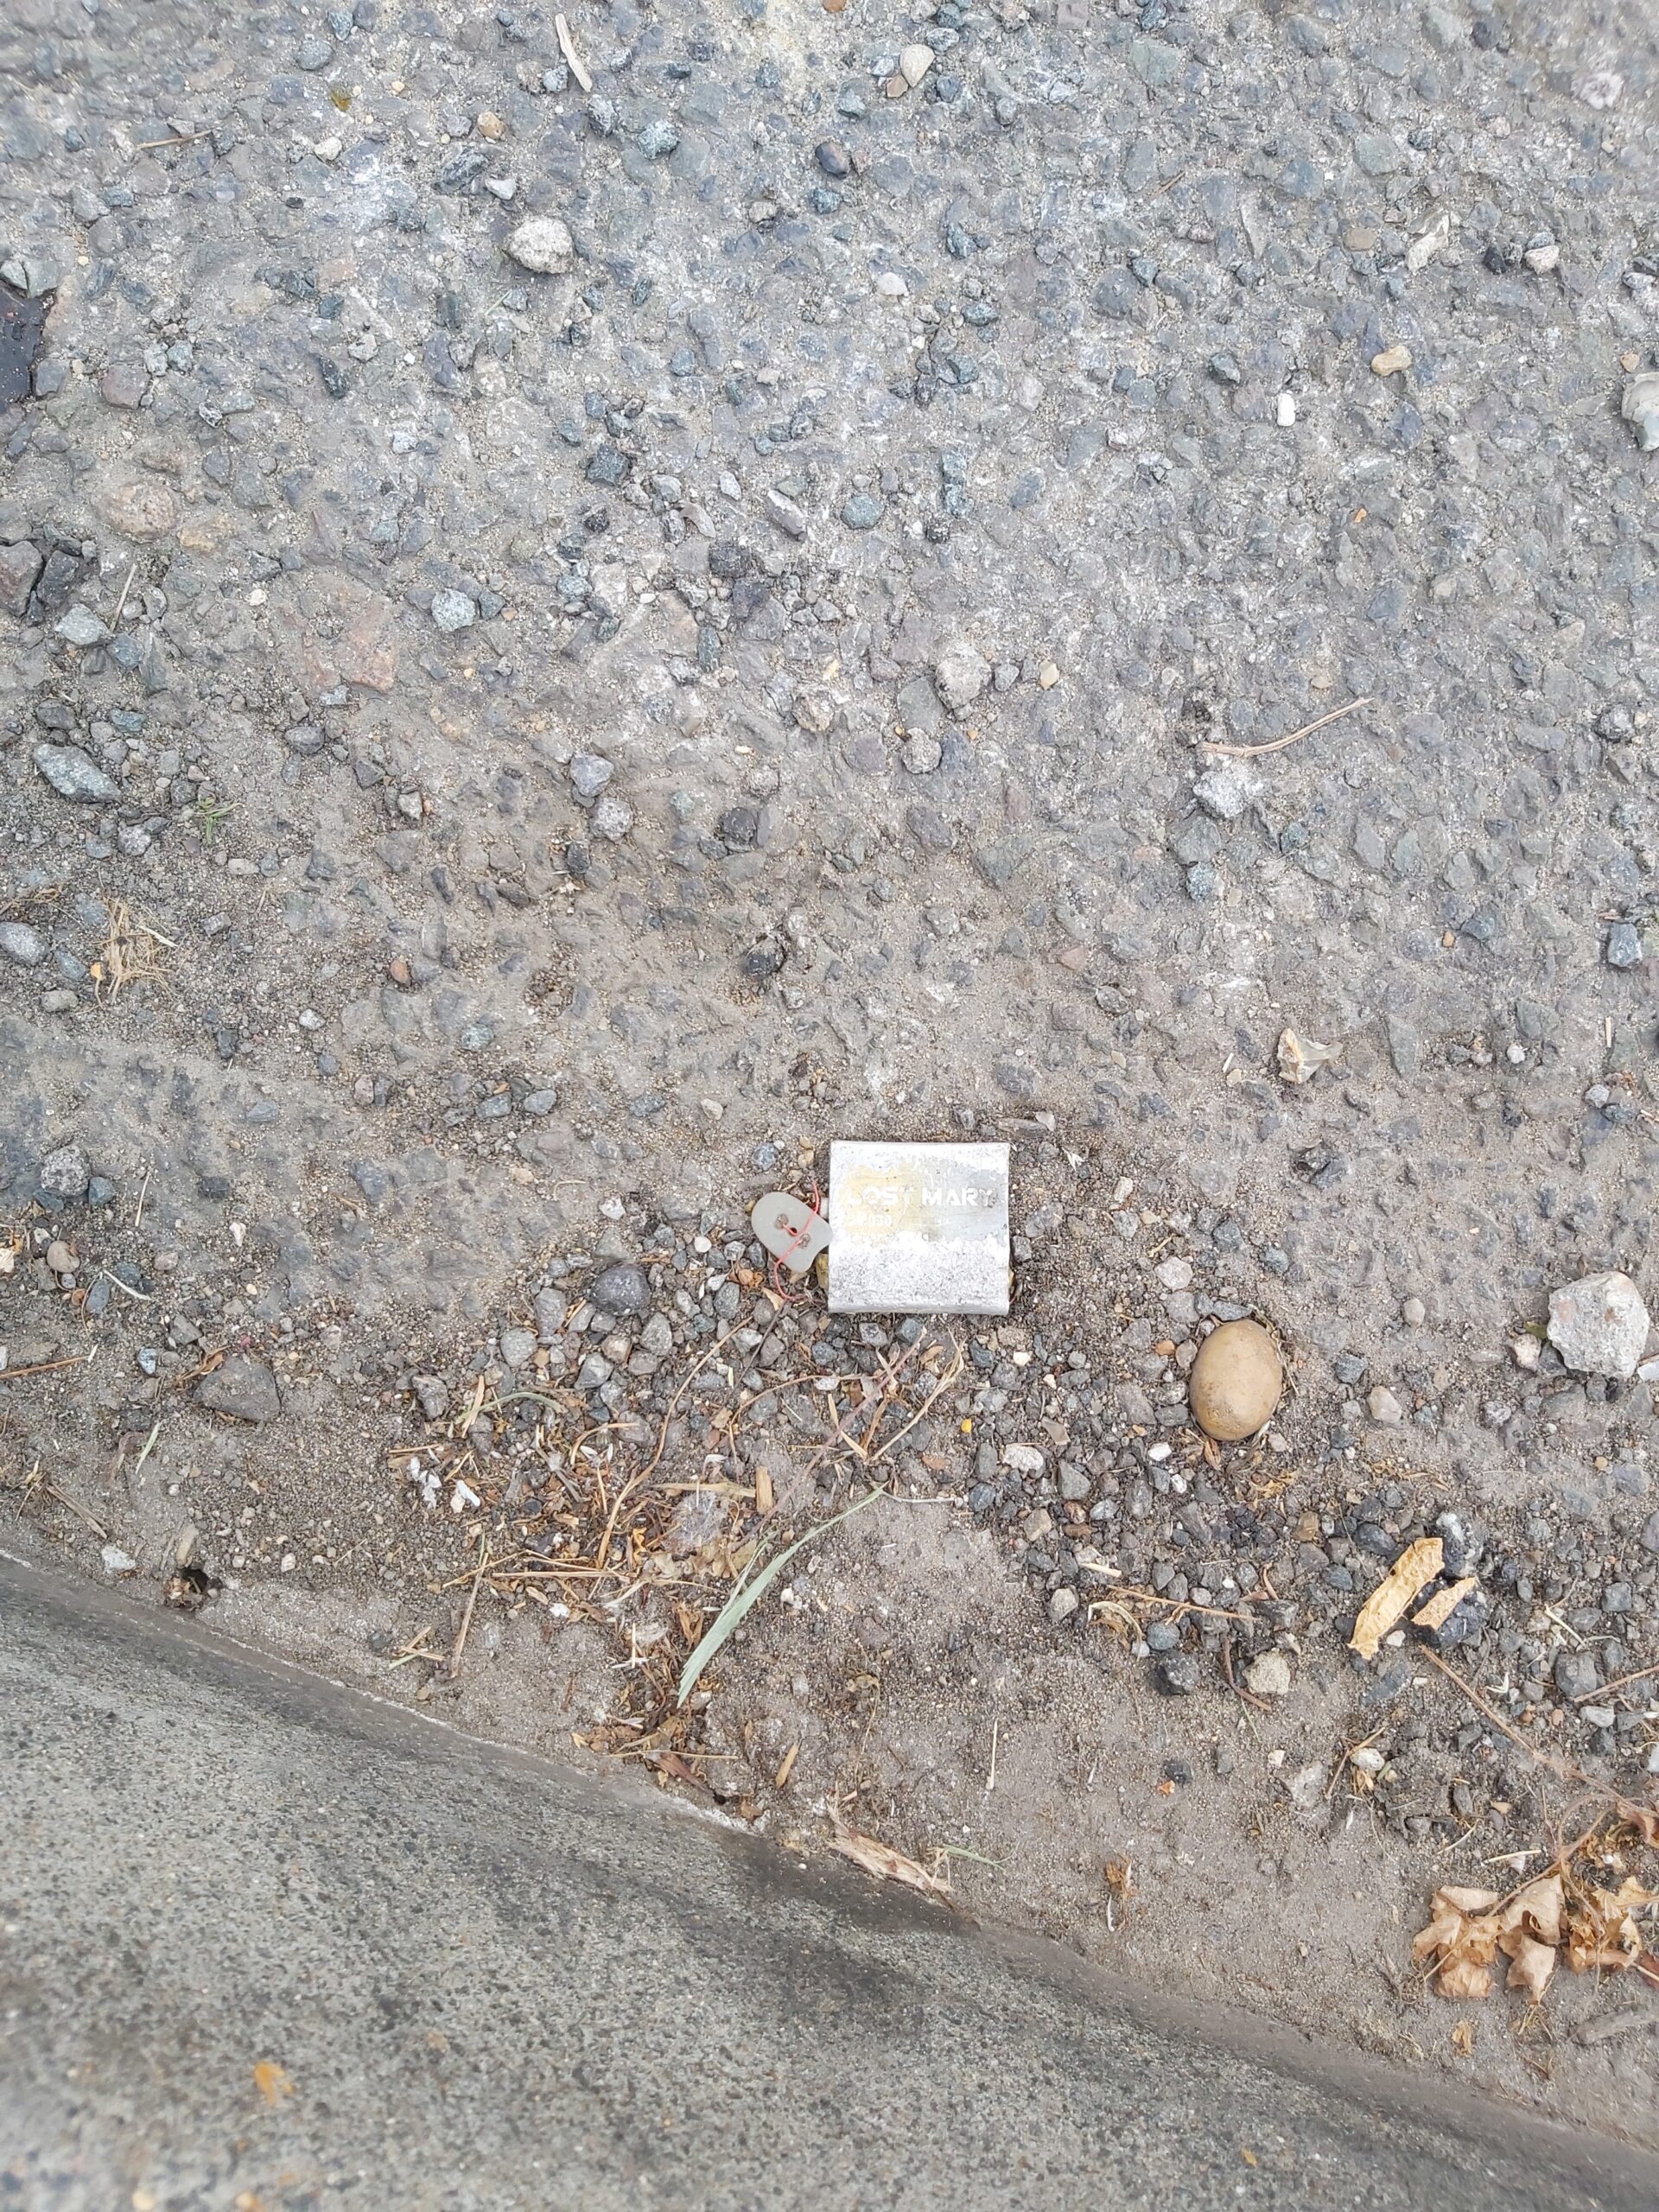 Discarded e-cigarette kerbside crushed by vehicle